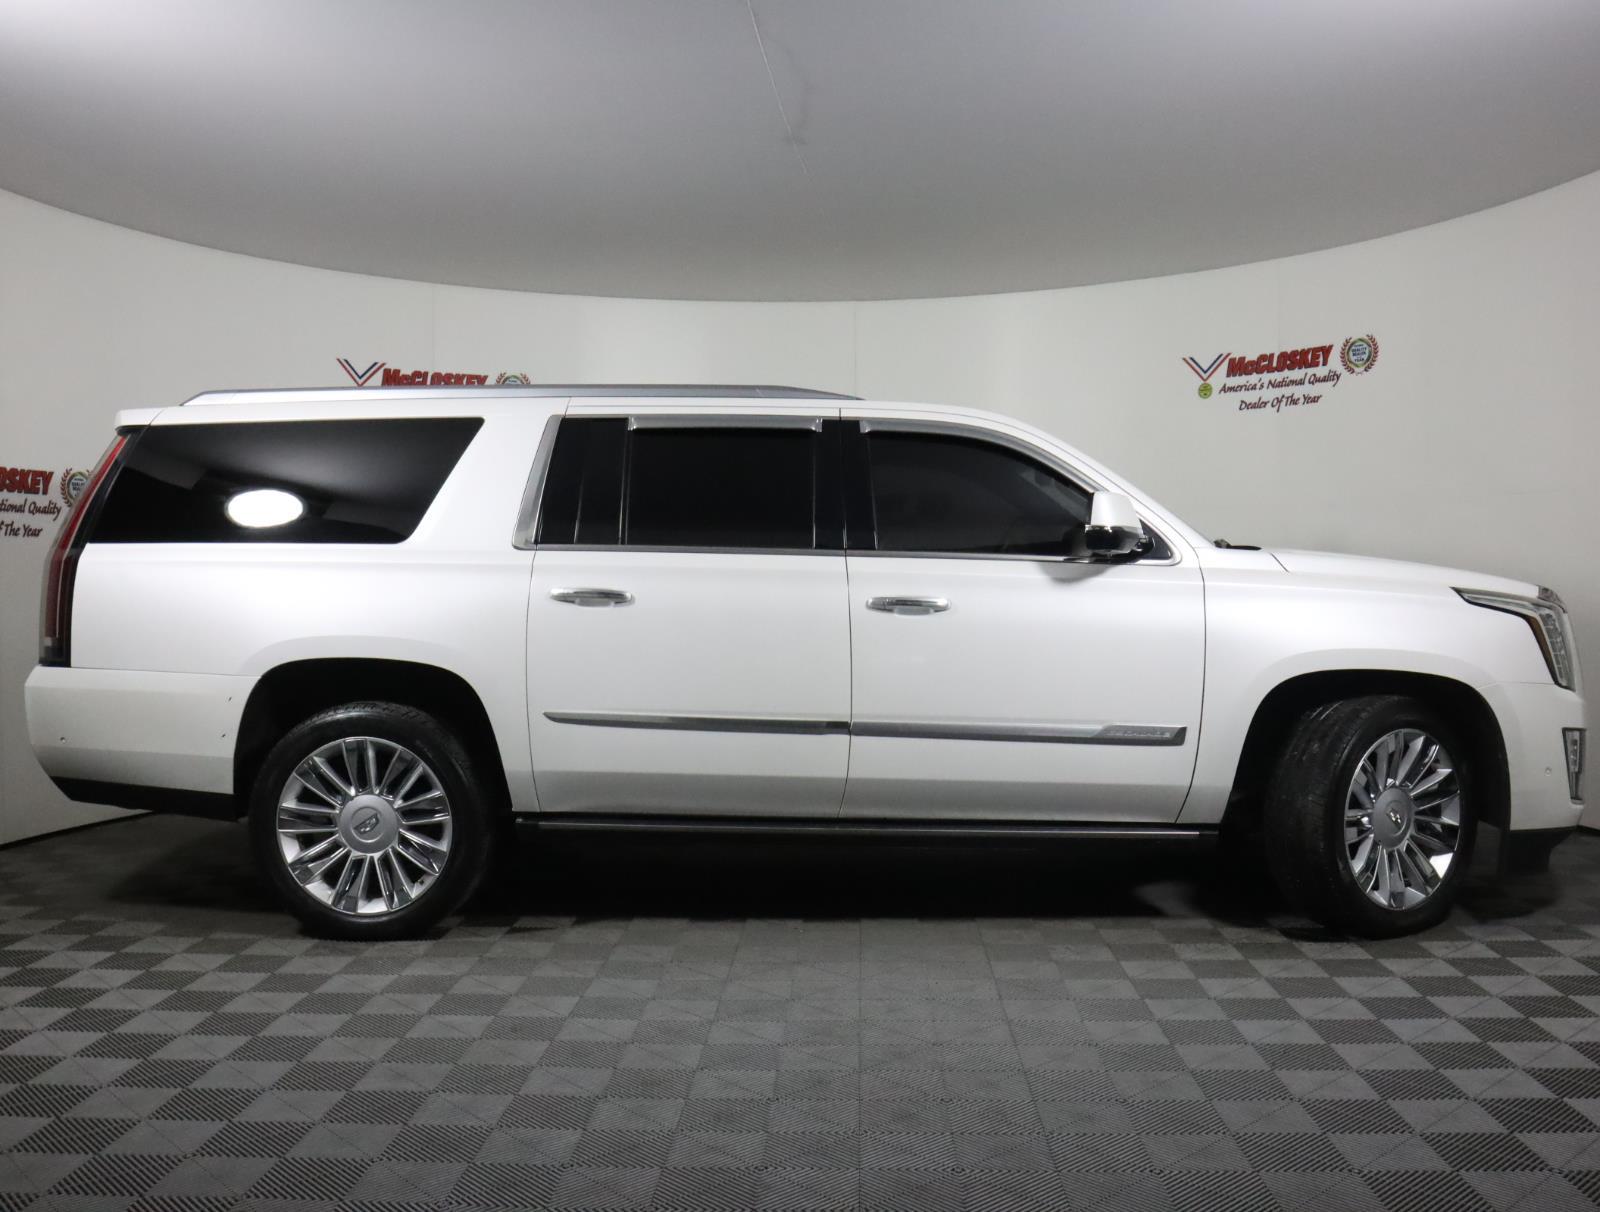 Preowned 2017 CADILLAC Escalade ESV Platinum ONE OWNER! for sale by McCloskey Imports & 4X4's in Colorado Springs, CO